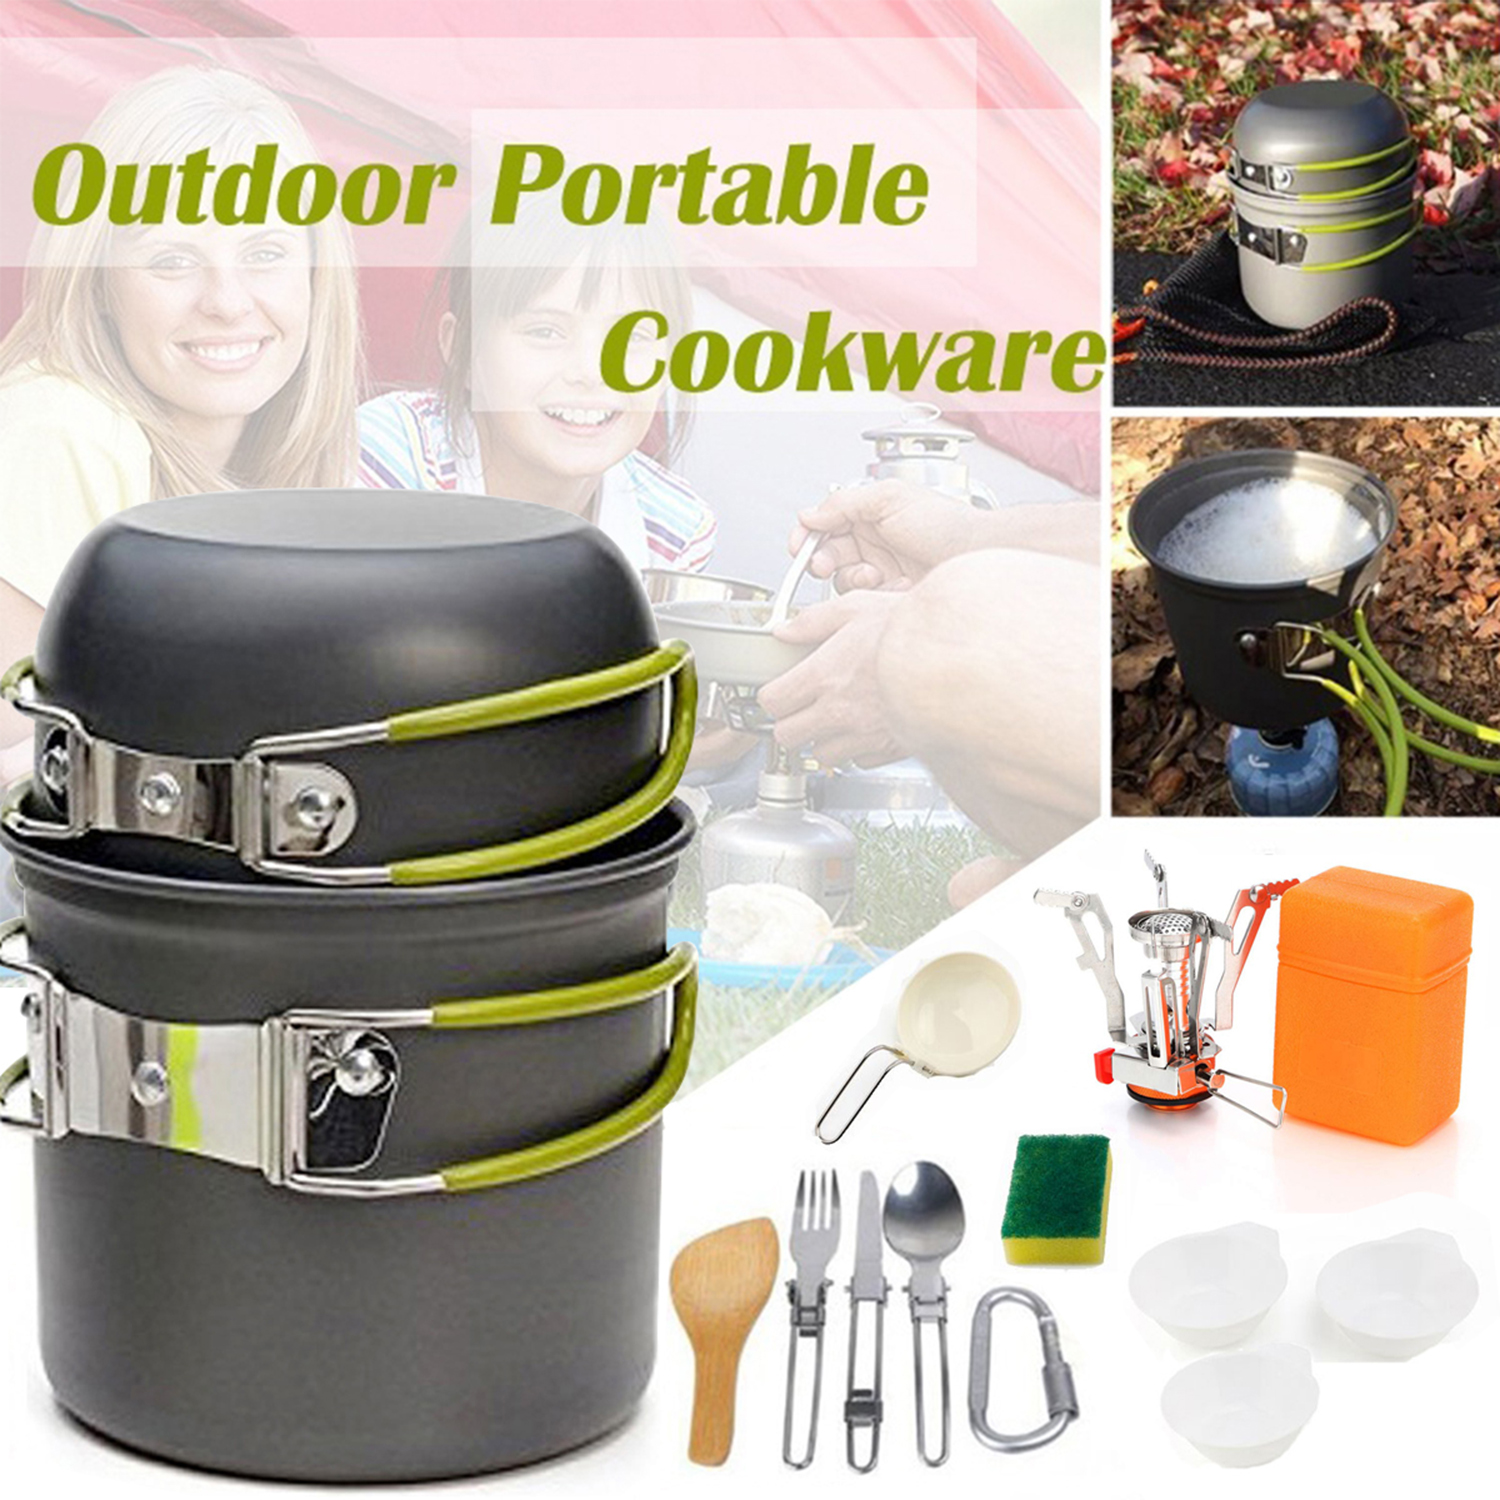 GL Portable Light Outdoor Camping Cookware Sets Gas Stove with Foldable Tableware Pan Dishwashing Sponge Hiking Picnic Tool 17